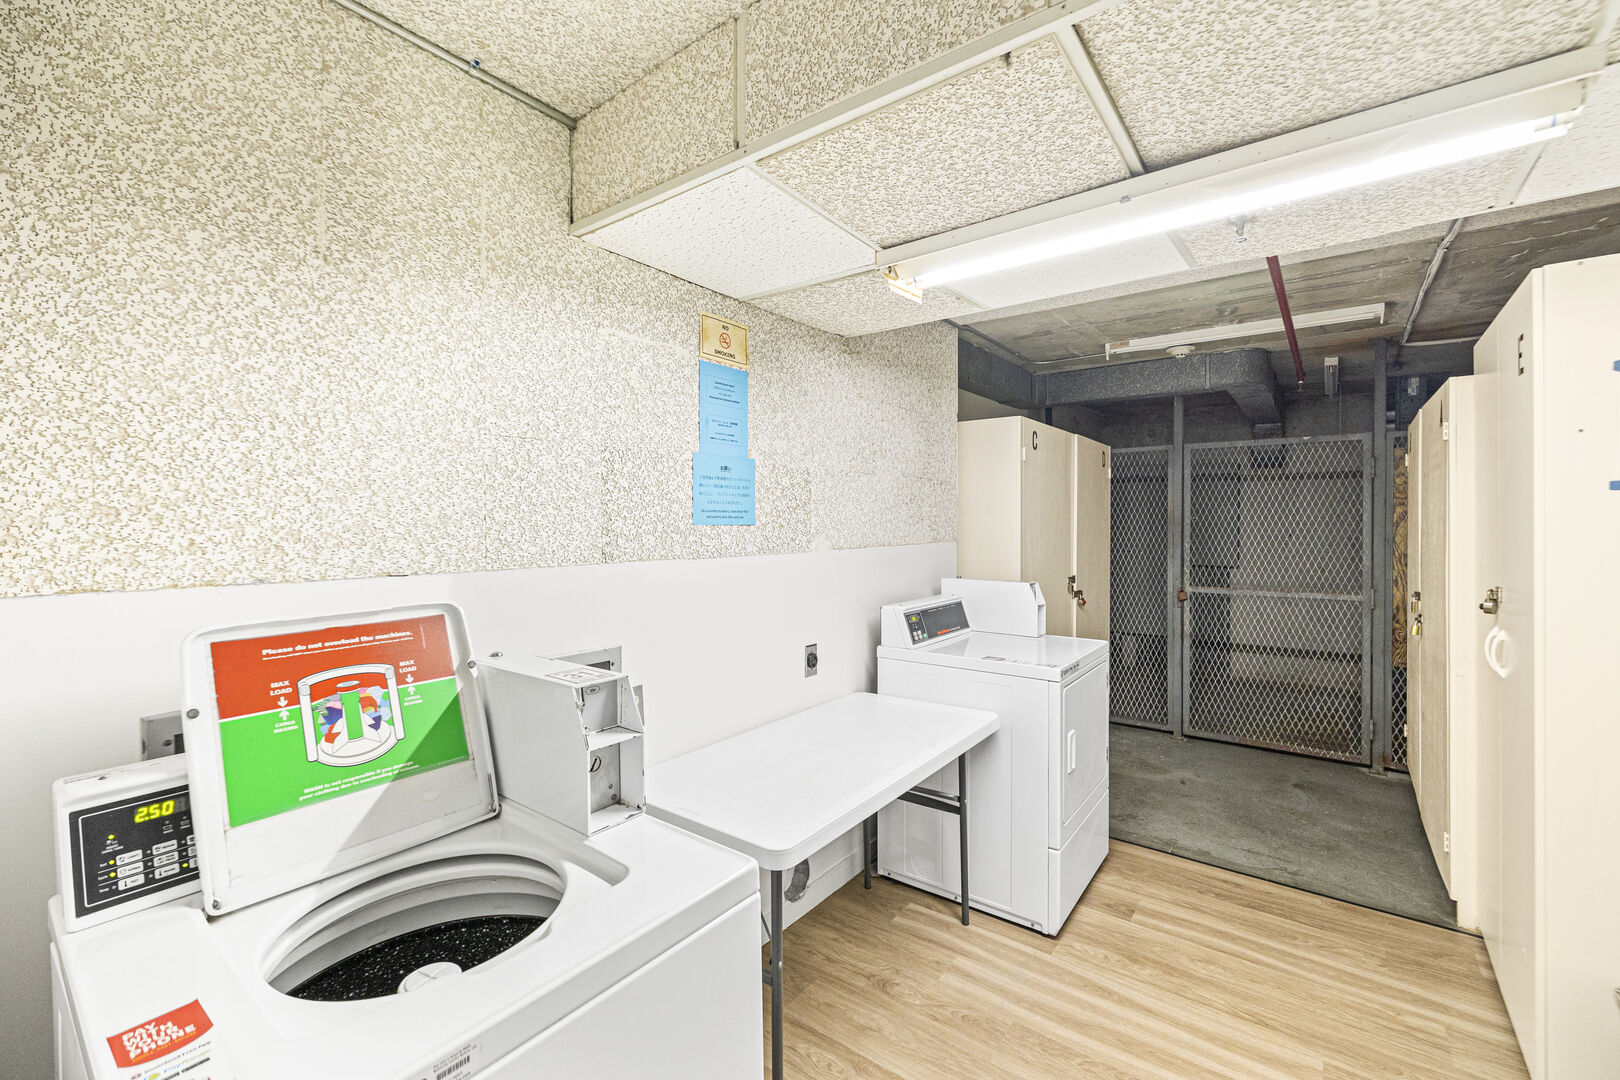 Laundry room on each floor with coin-operated washers and dryers.